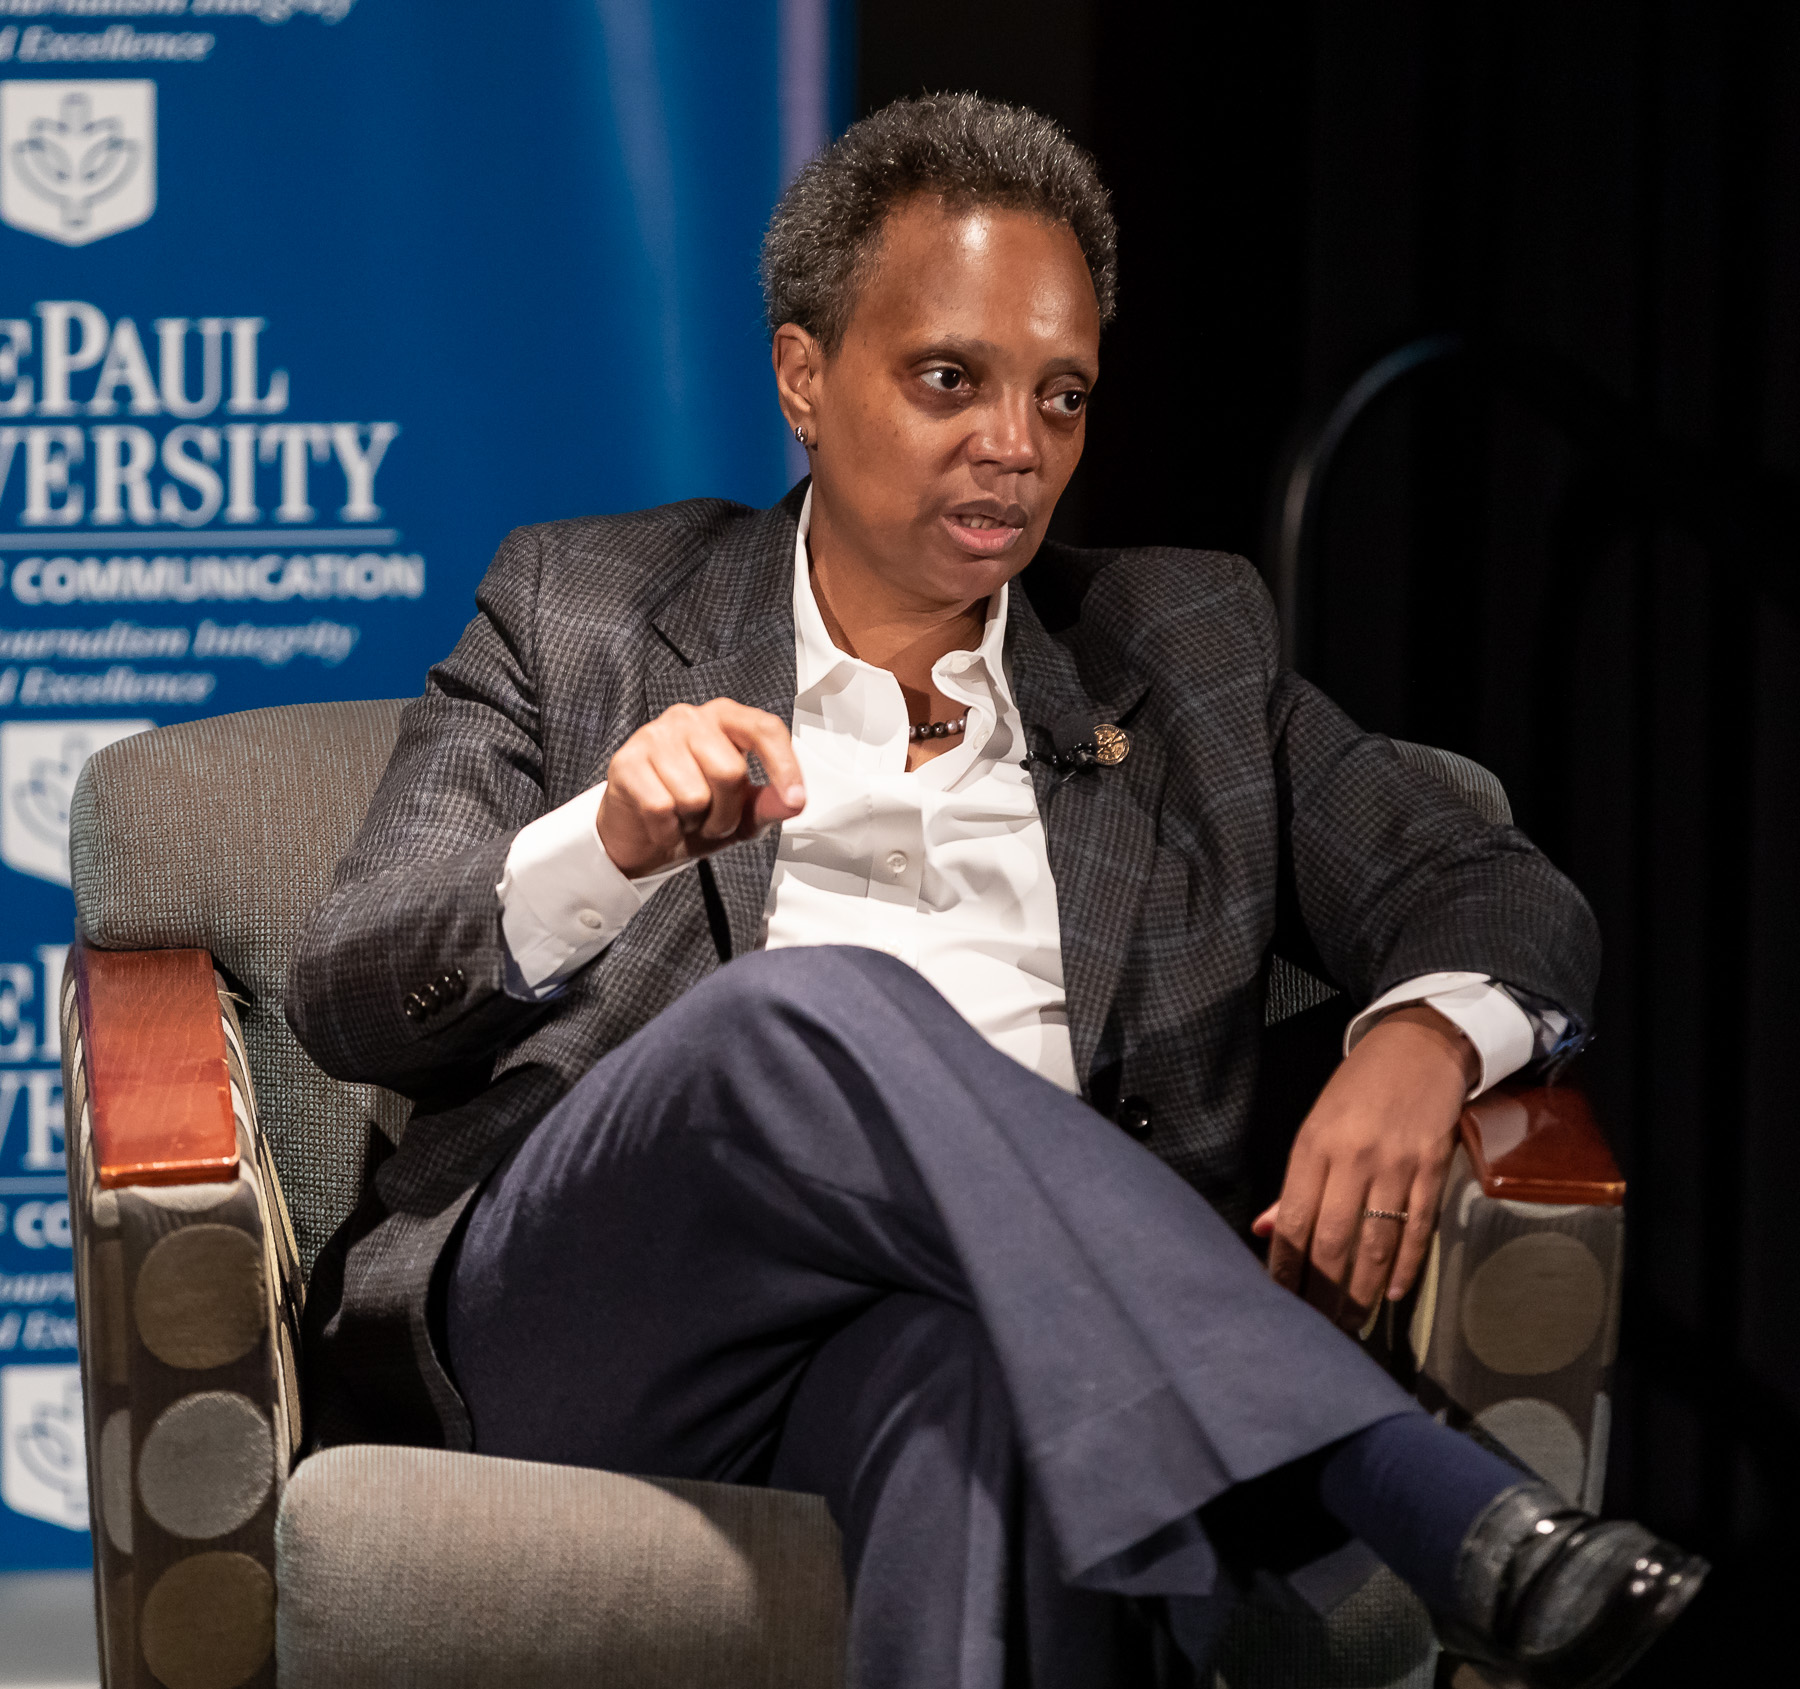 Chicago Mayor Lori Lightfoot reacts to a question during a forum with DePaul University journalism and public relations students. (DePaul University/Jeff Carrion)